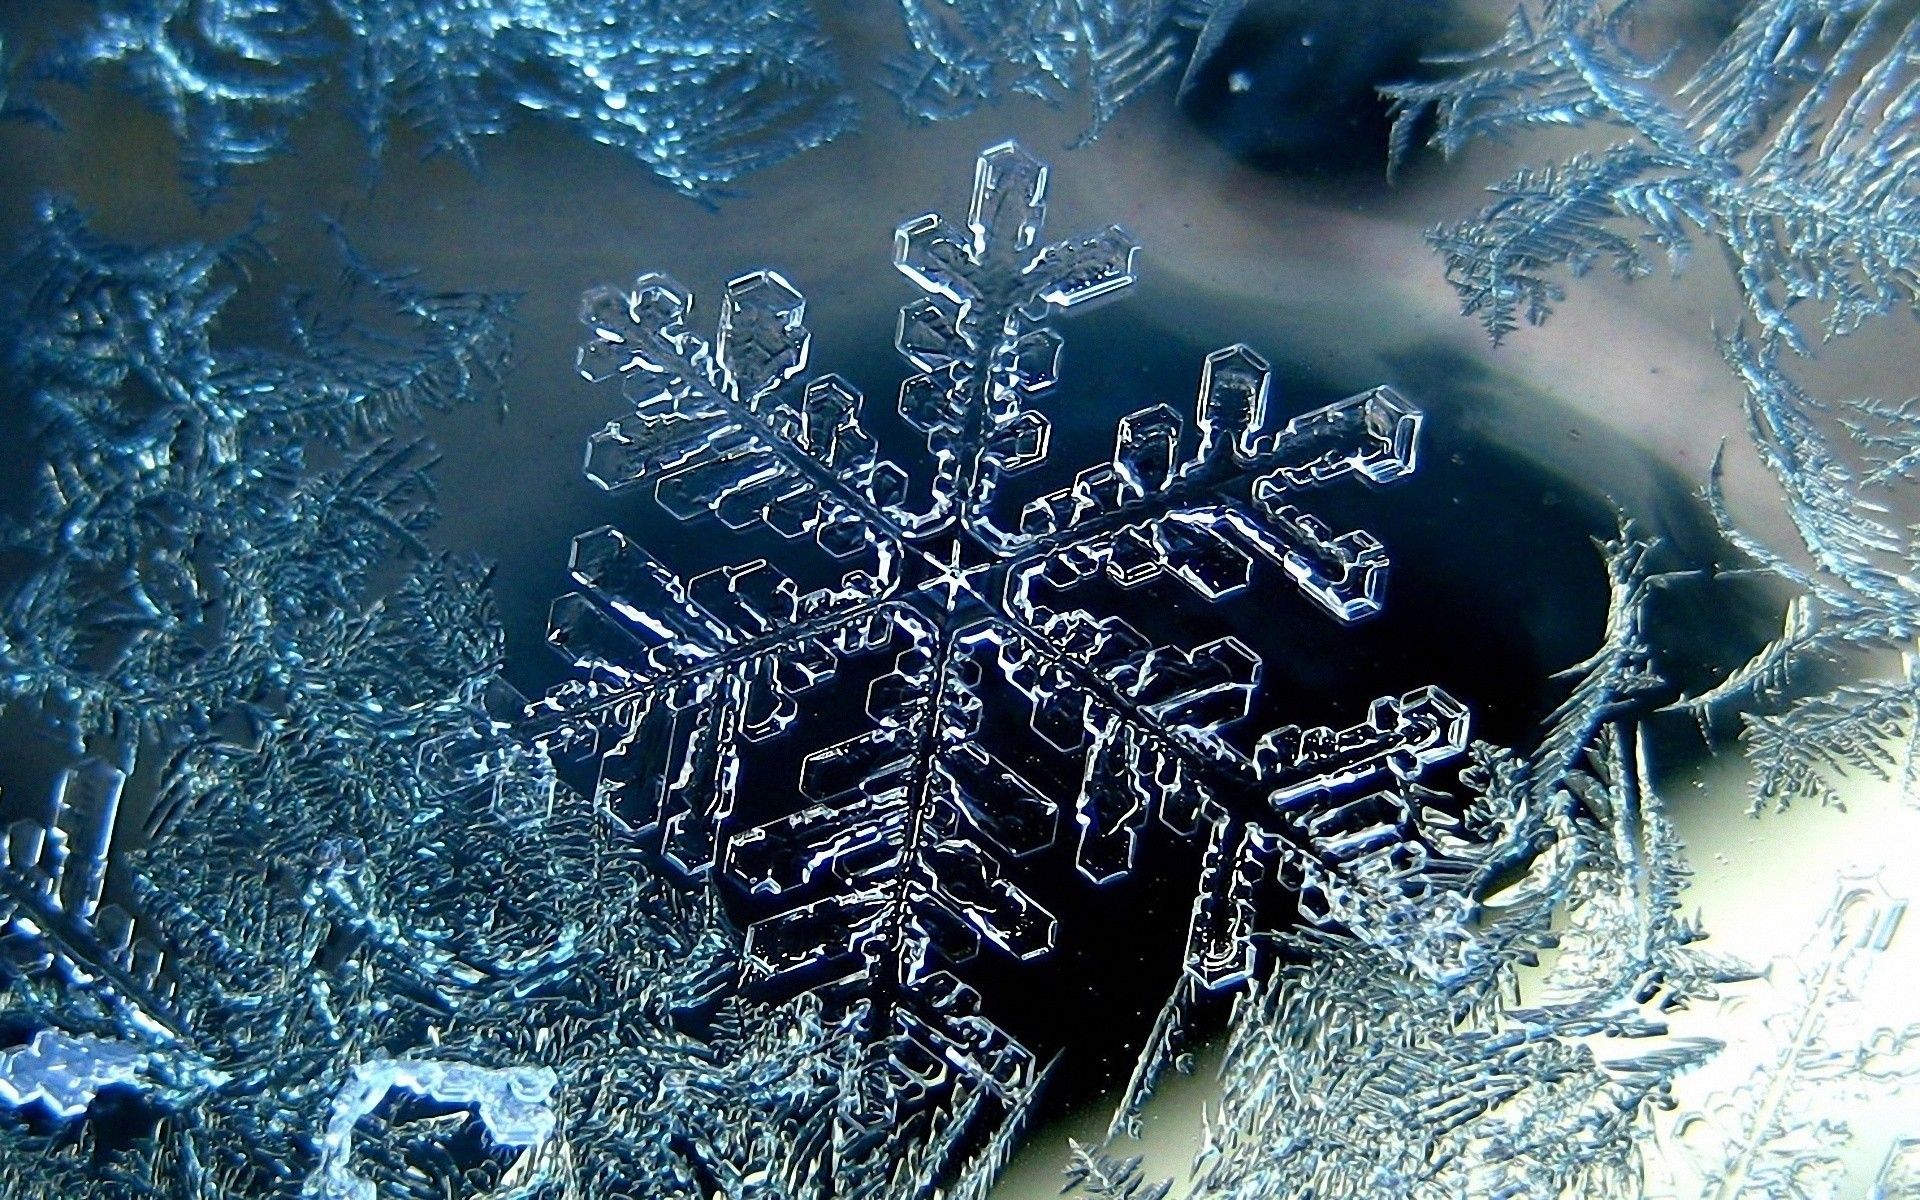 A snowflake is seen in this close-up photo. - Snowflake